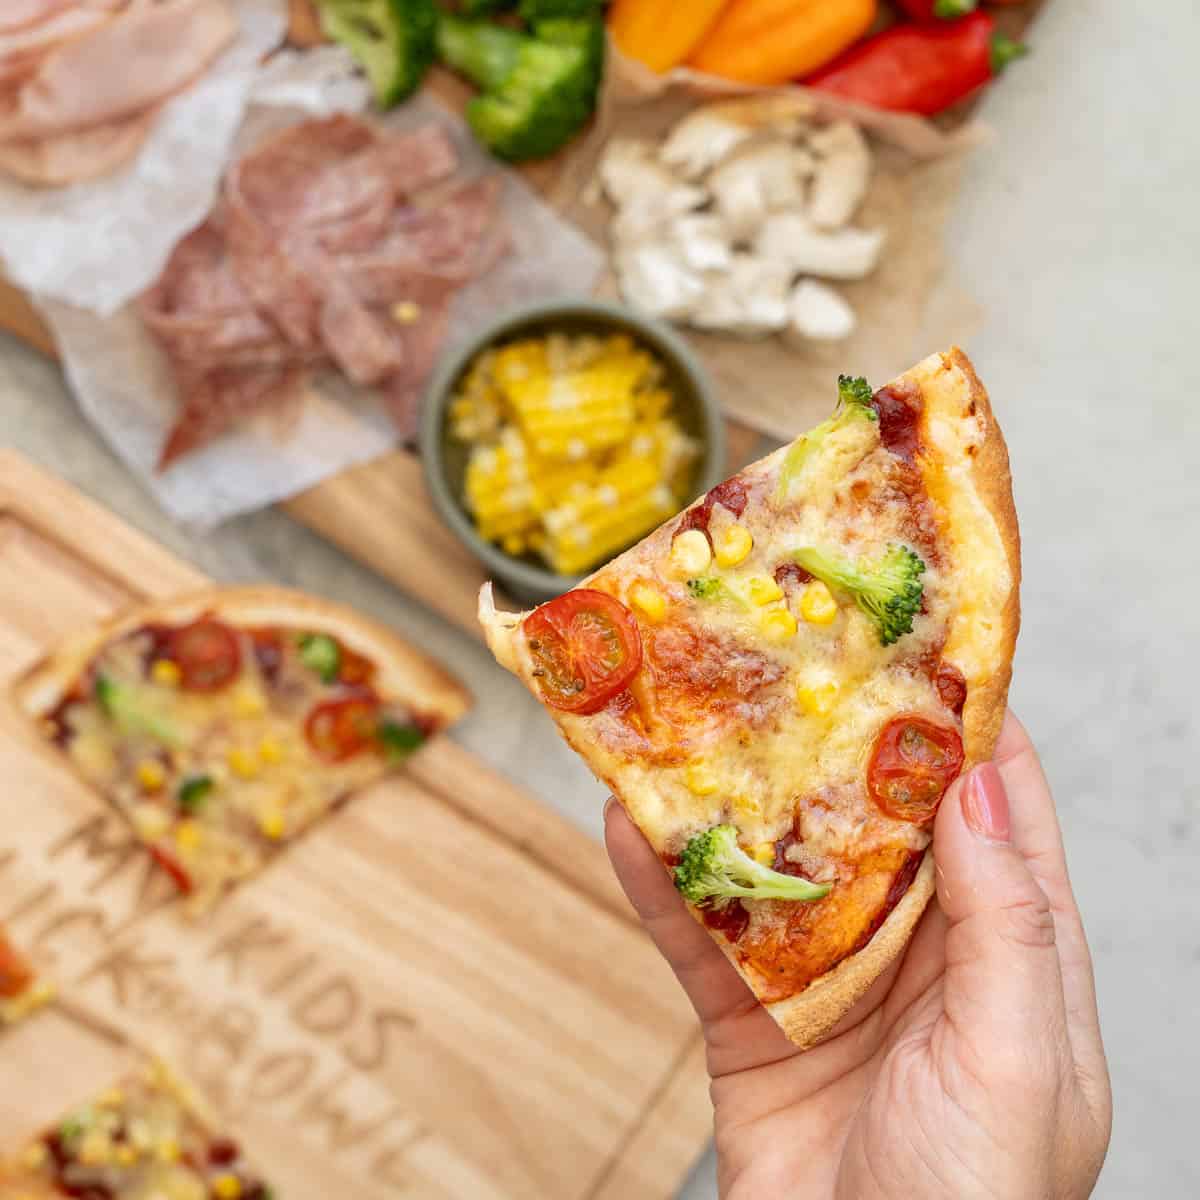 A piece of pizza being held up to the camera. corn, broccoli and tomato visible.